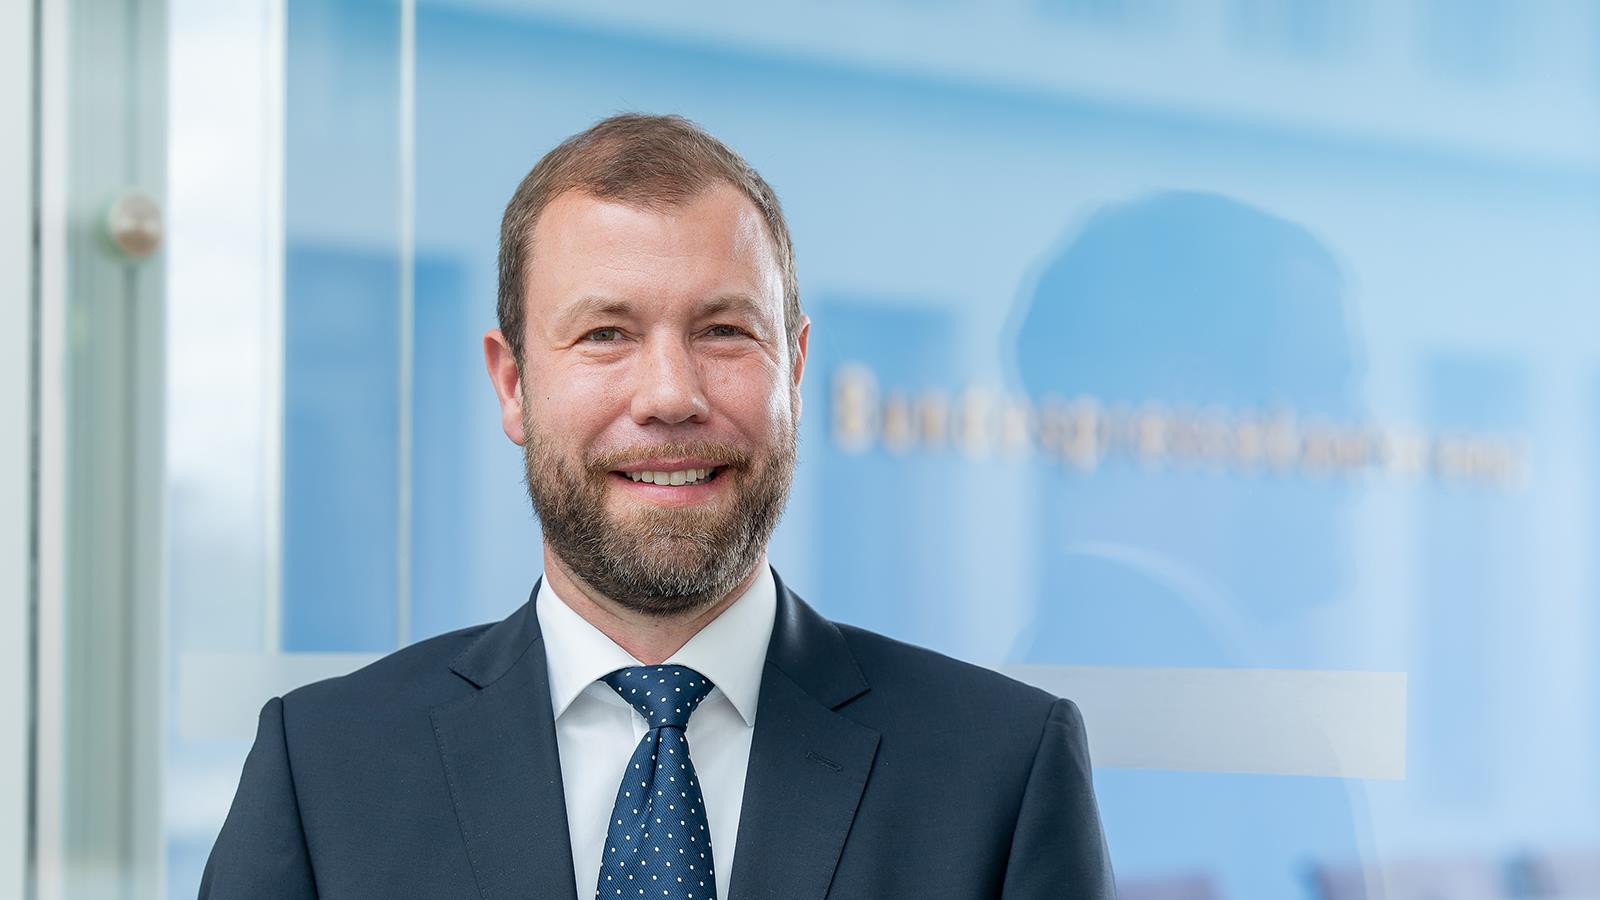 Christian Wieszner, VP und General Manager CSL Behring Germany, Austria and Emerging Europe